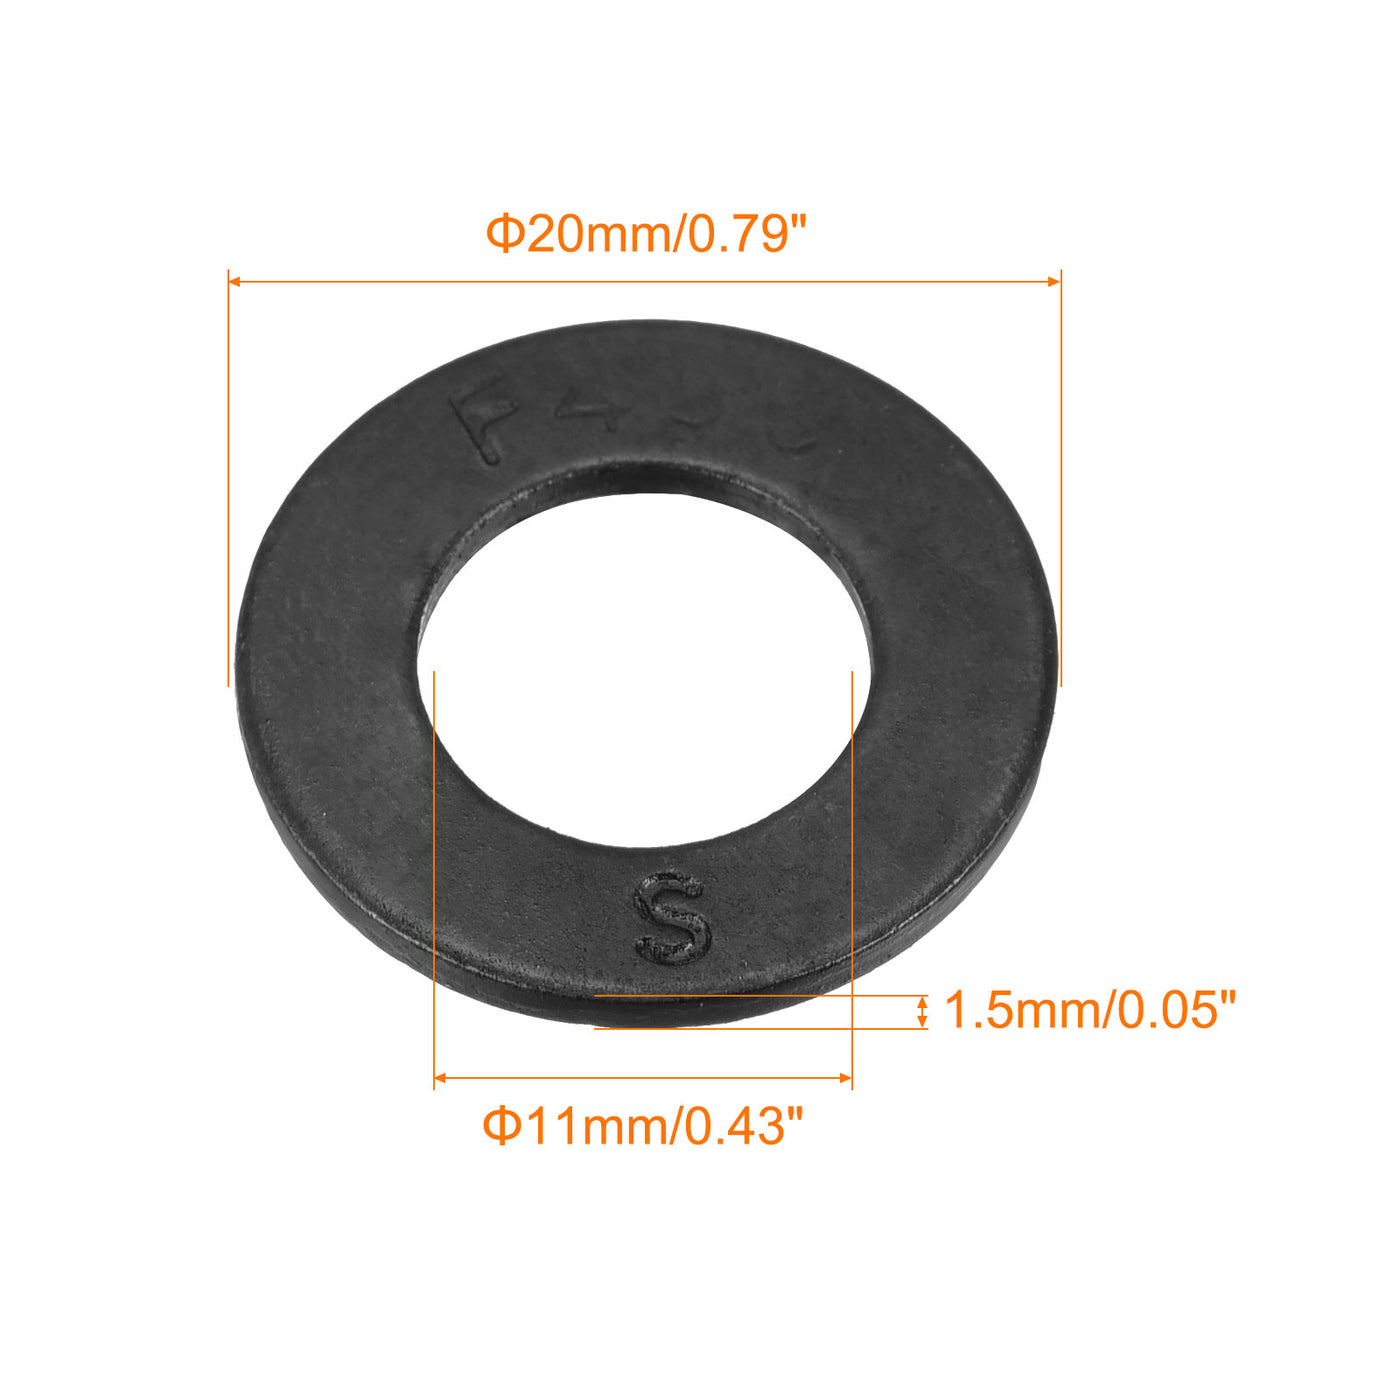 uxcell Uxcell 3/8-Inch Flat Washer, Alloy Steel Black Oxide Finish Pack of 100